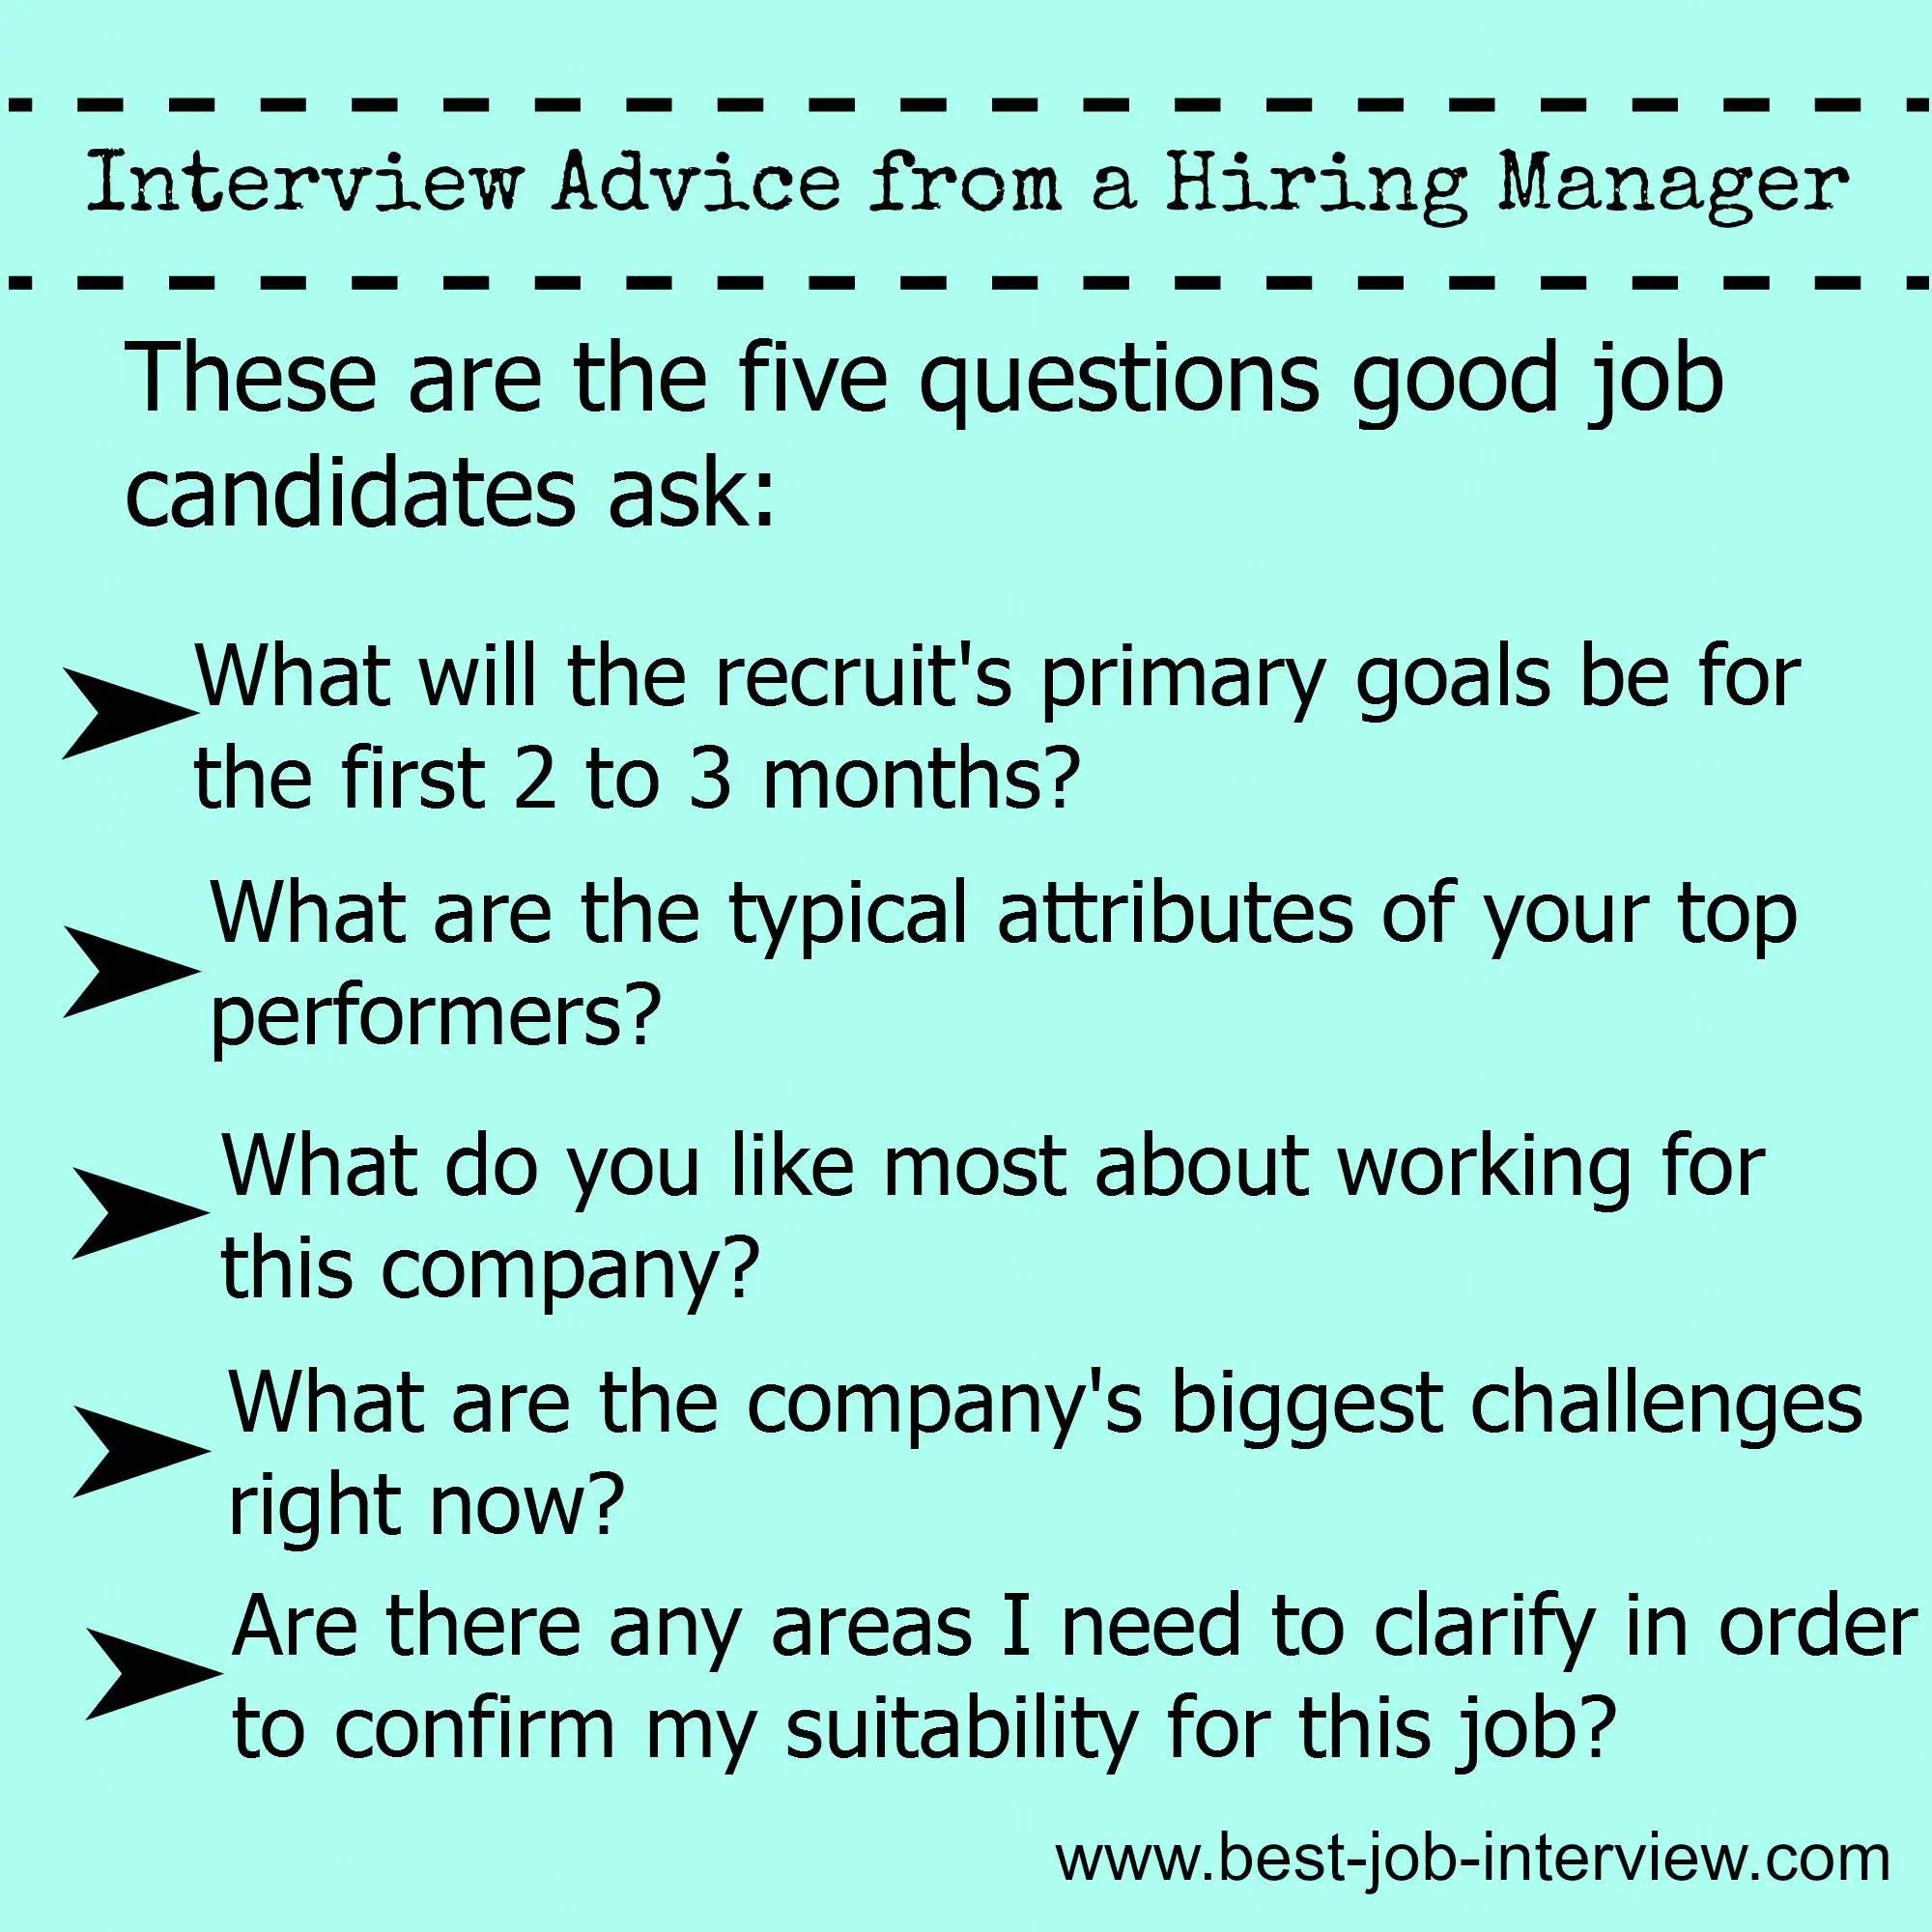 5 smart questions to ask in your job interview. #interviews # ...